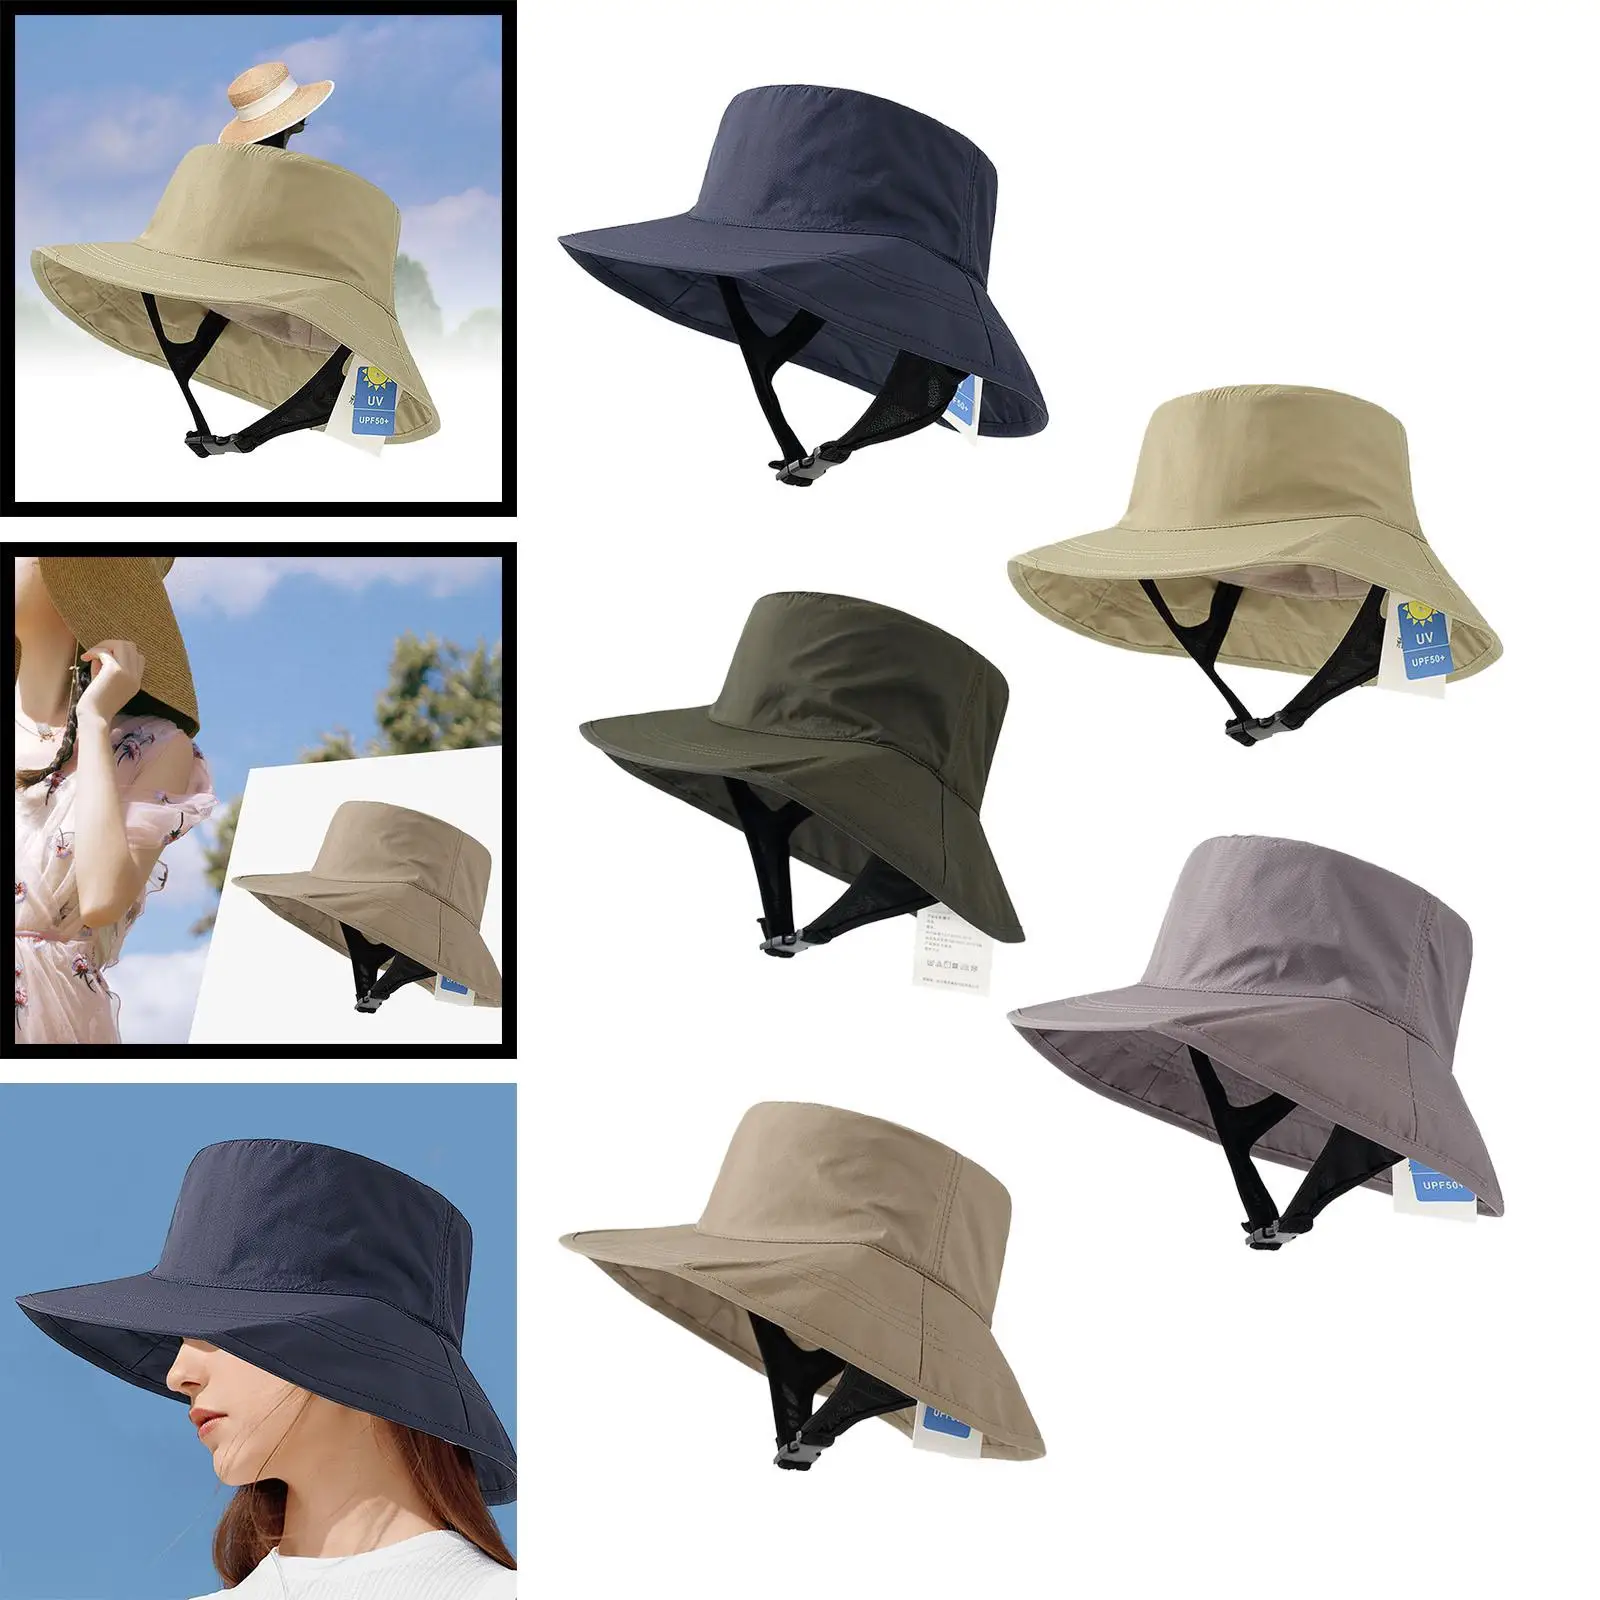 Sun Hat for Women Men Beach Cap with Adjustable Buckle Lightweight Fashionable Fishing Hat for Climbing Commuting Vacation